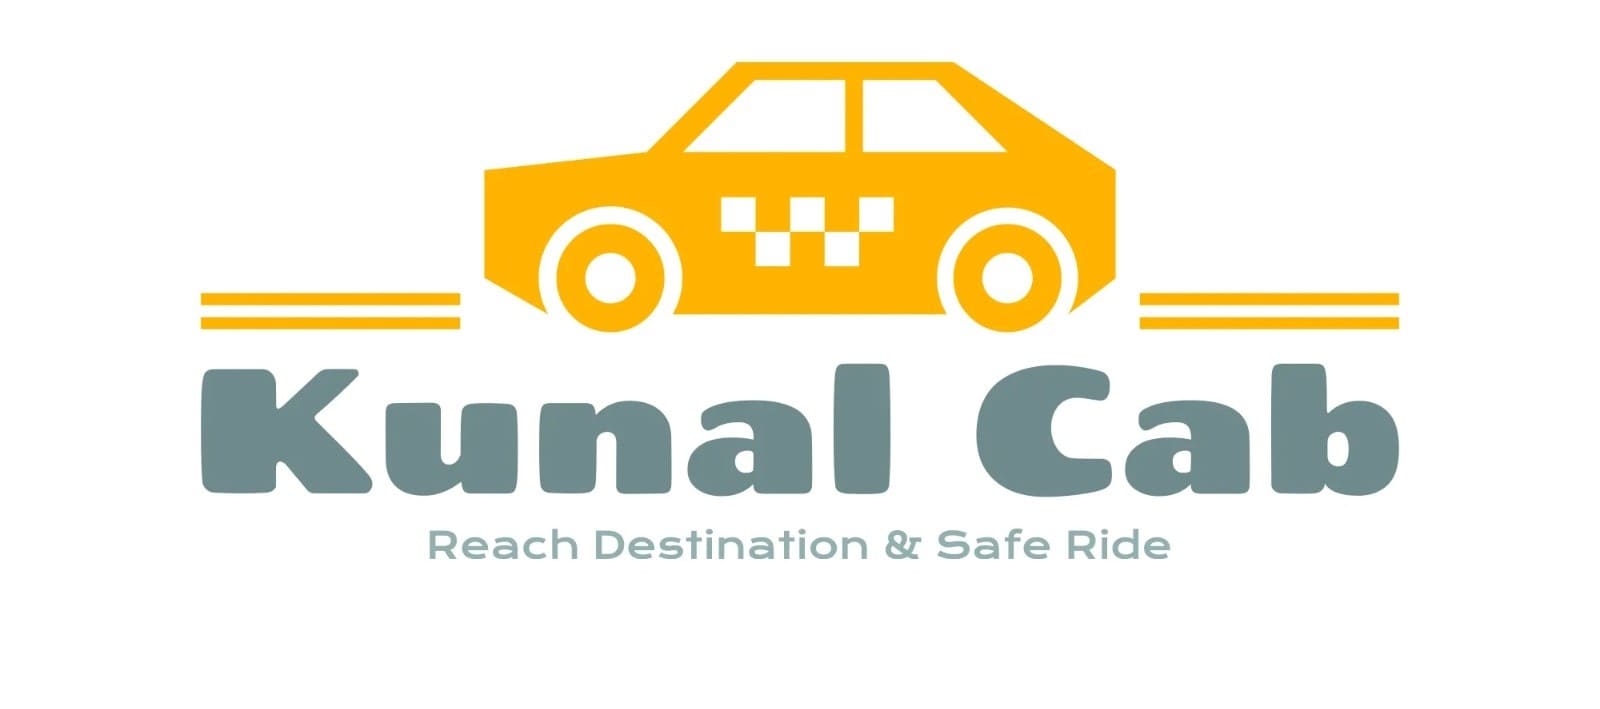 Udaipur Sightseeing Taxi and Cab Service | Best Taxi Service in Udaipur